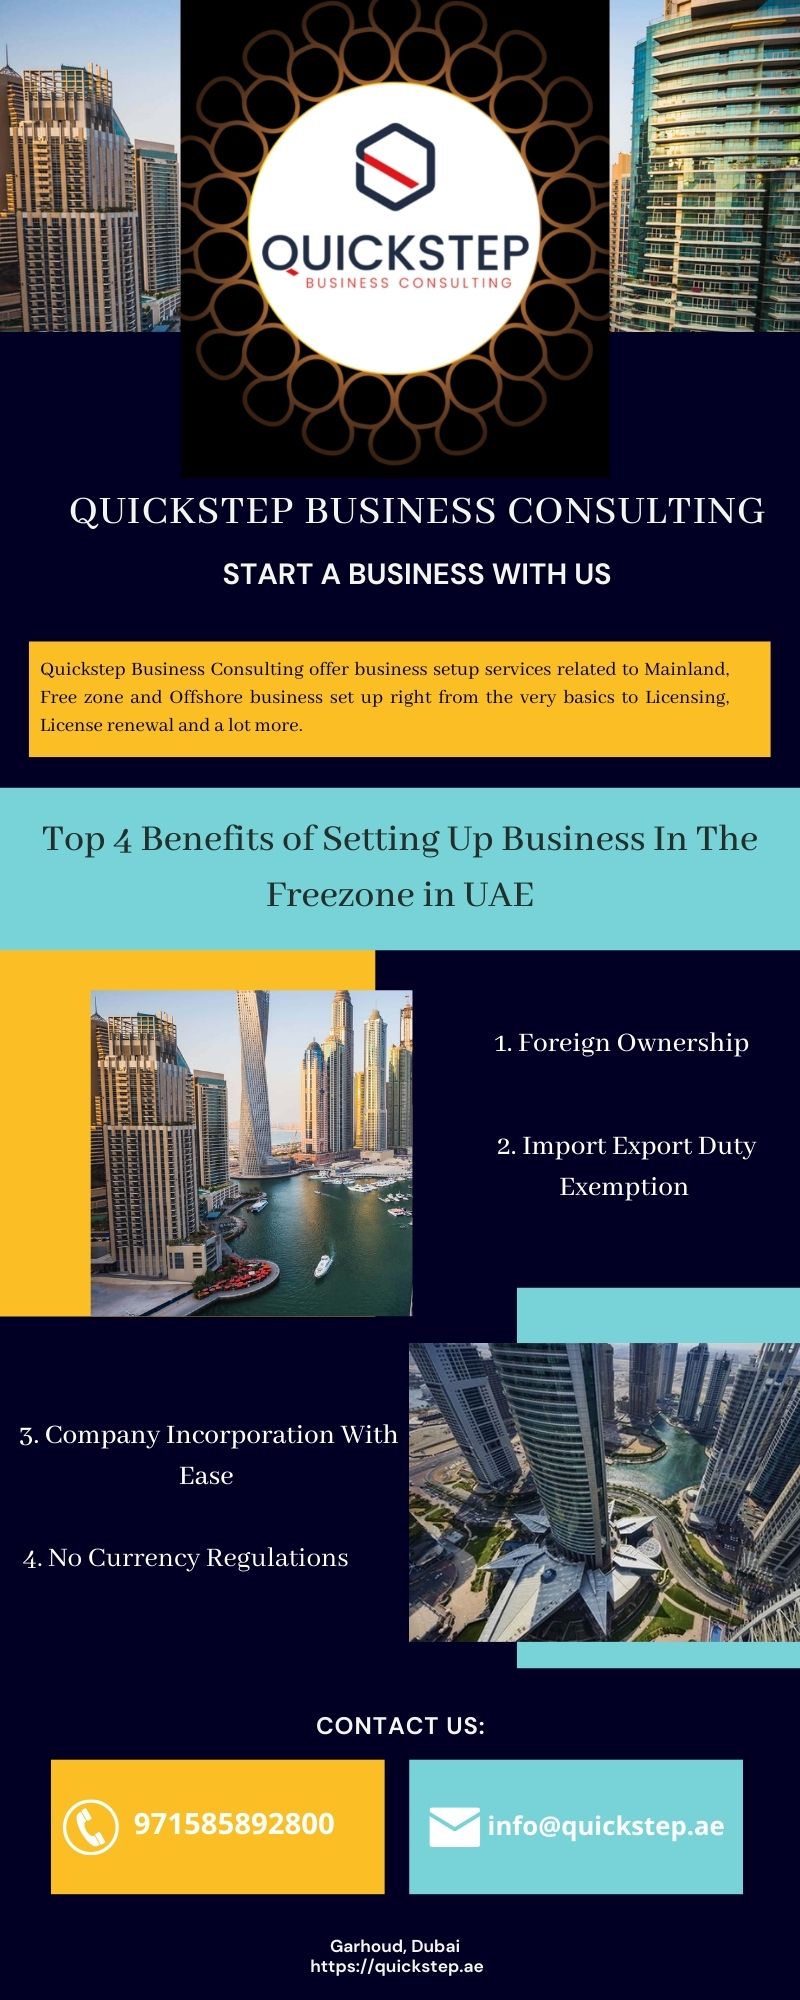 Top 4 Benefits of Setting Up Business In The Freezone in UAE.jpg Dubai has been witnessing a lot of investors coming into the market to set up new businesses. One of the great advantages that Dubai offers to these investors is the free zone which offers tremendous support and facilities to businesses. The Freezone offe by QuickstepBusiness